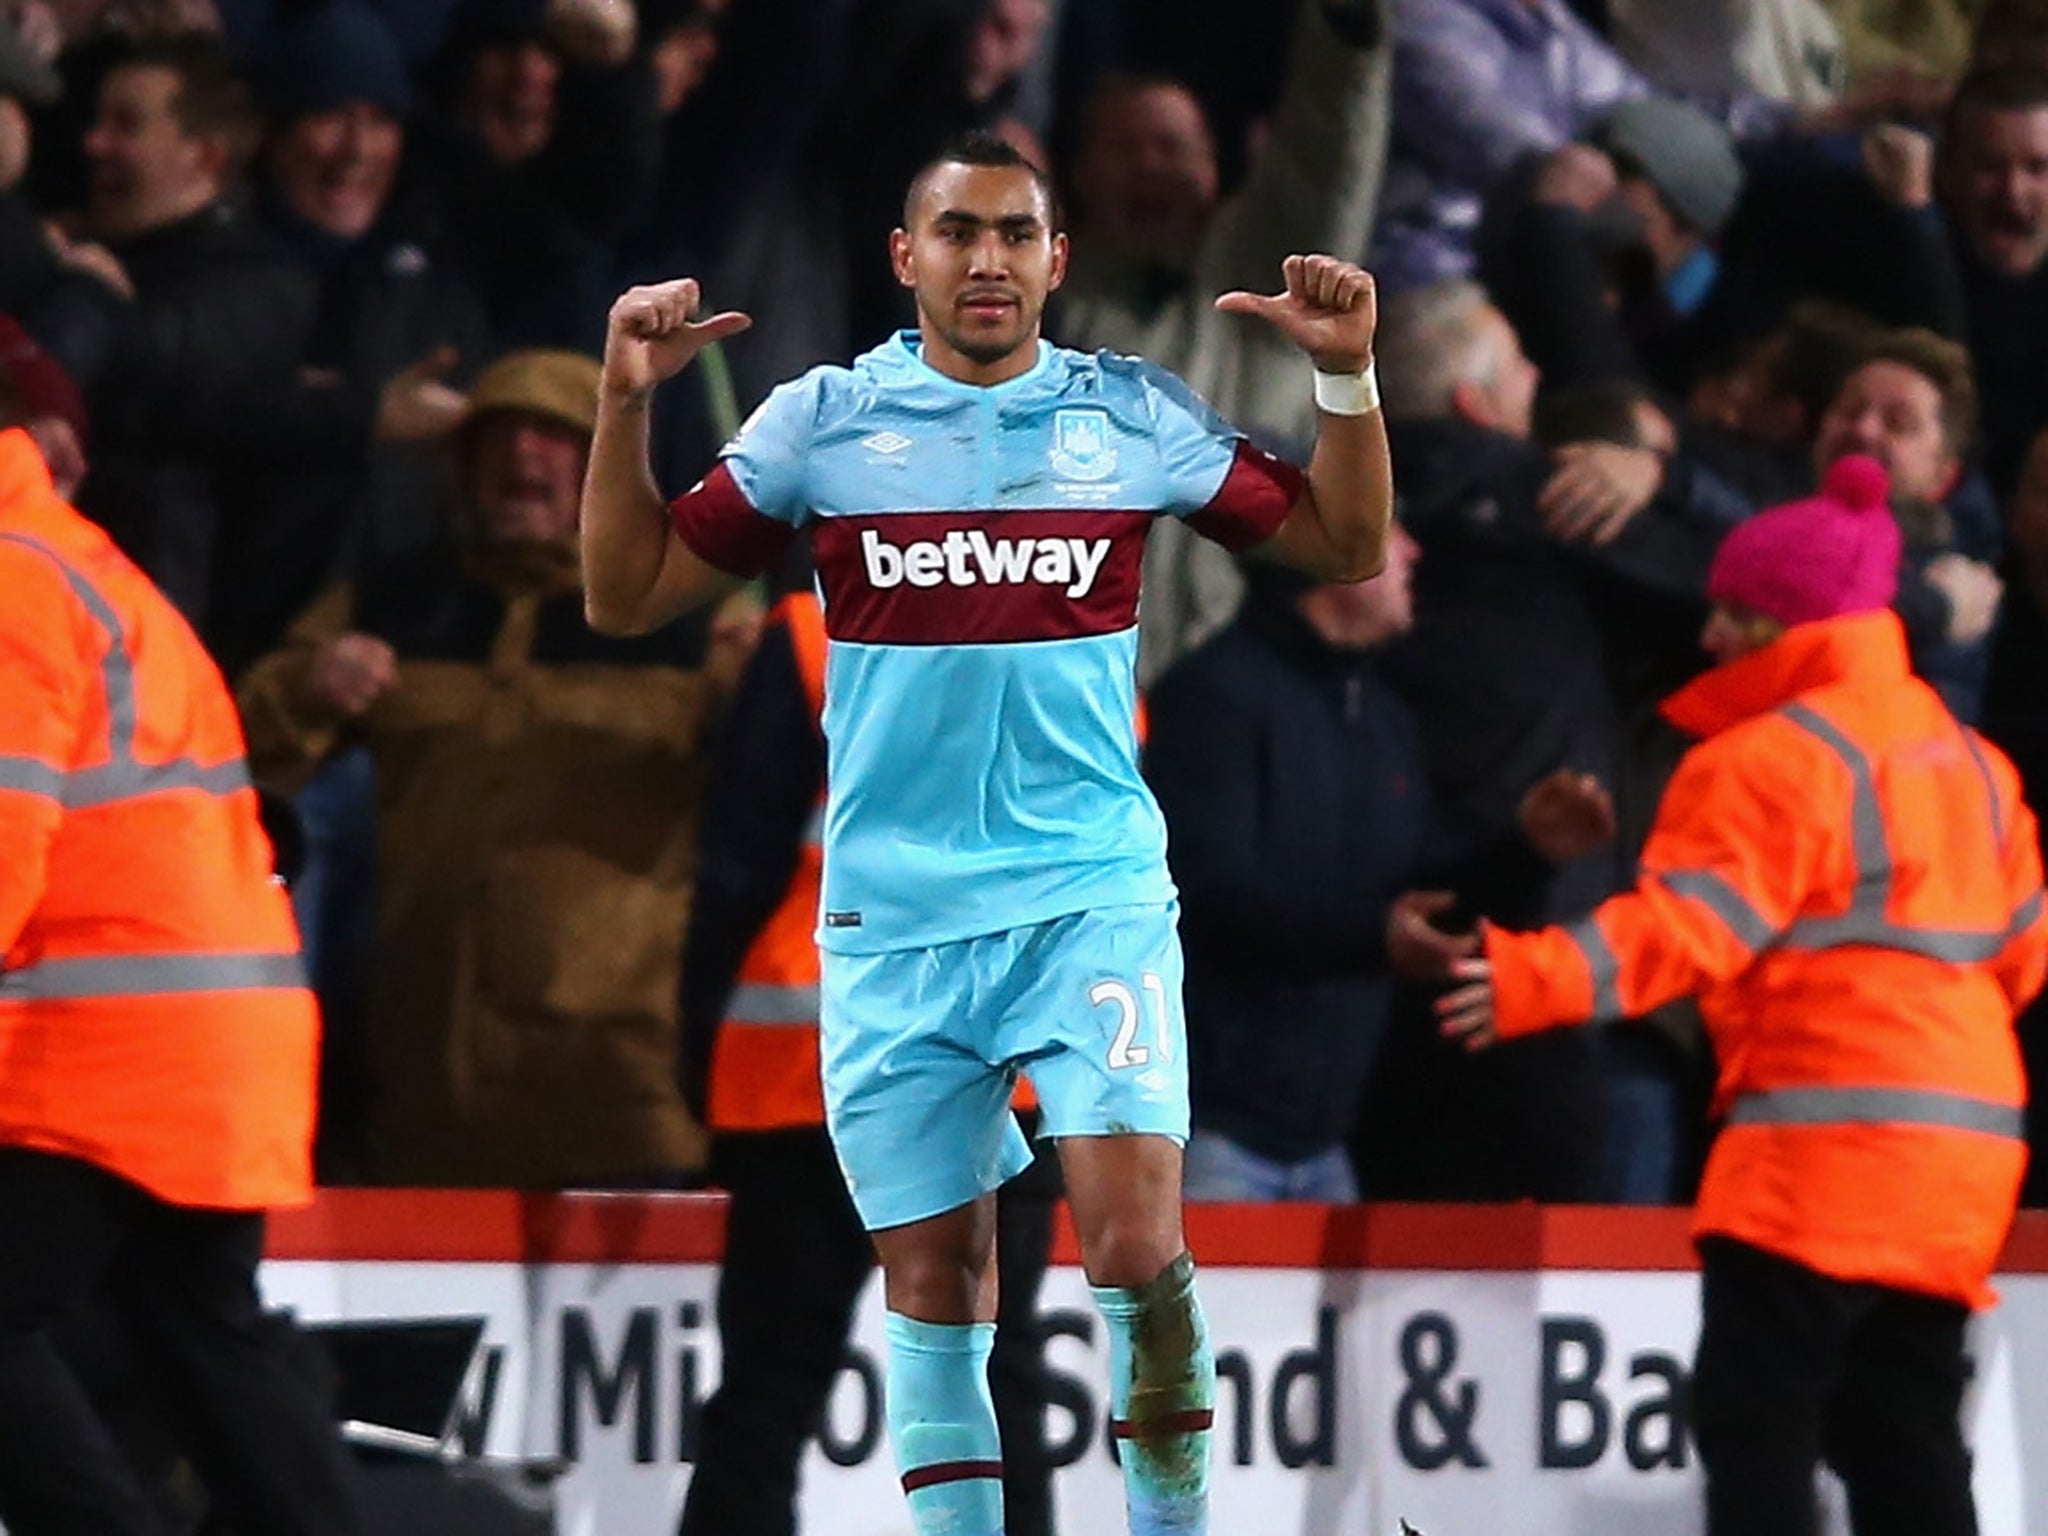 Dimitri Payet has been in outstanding form for West Ham this season